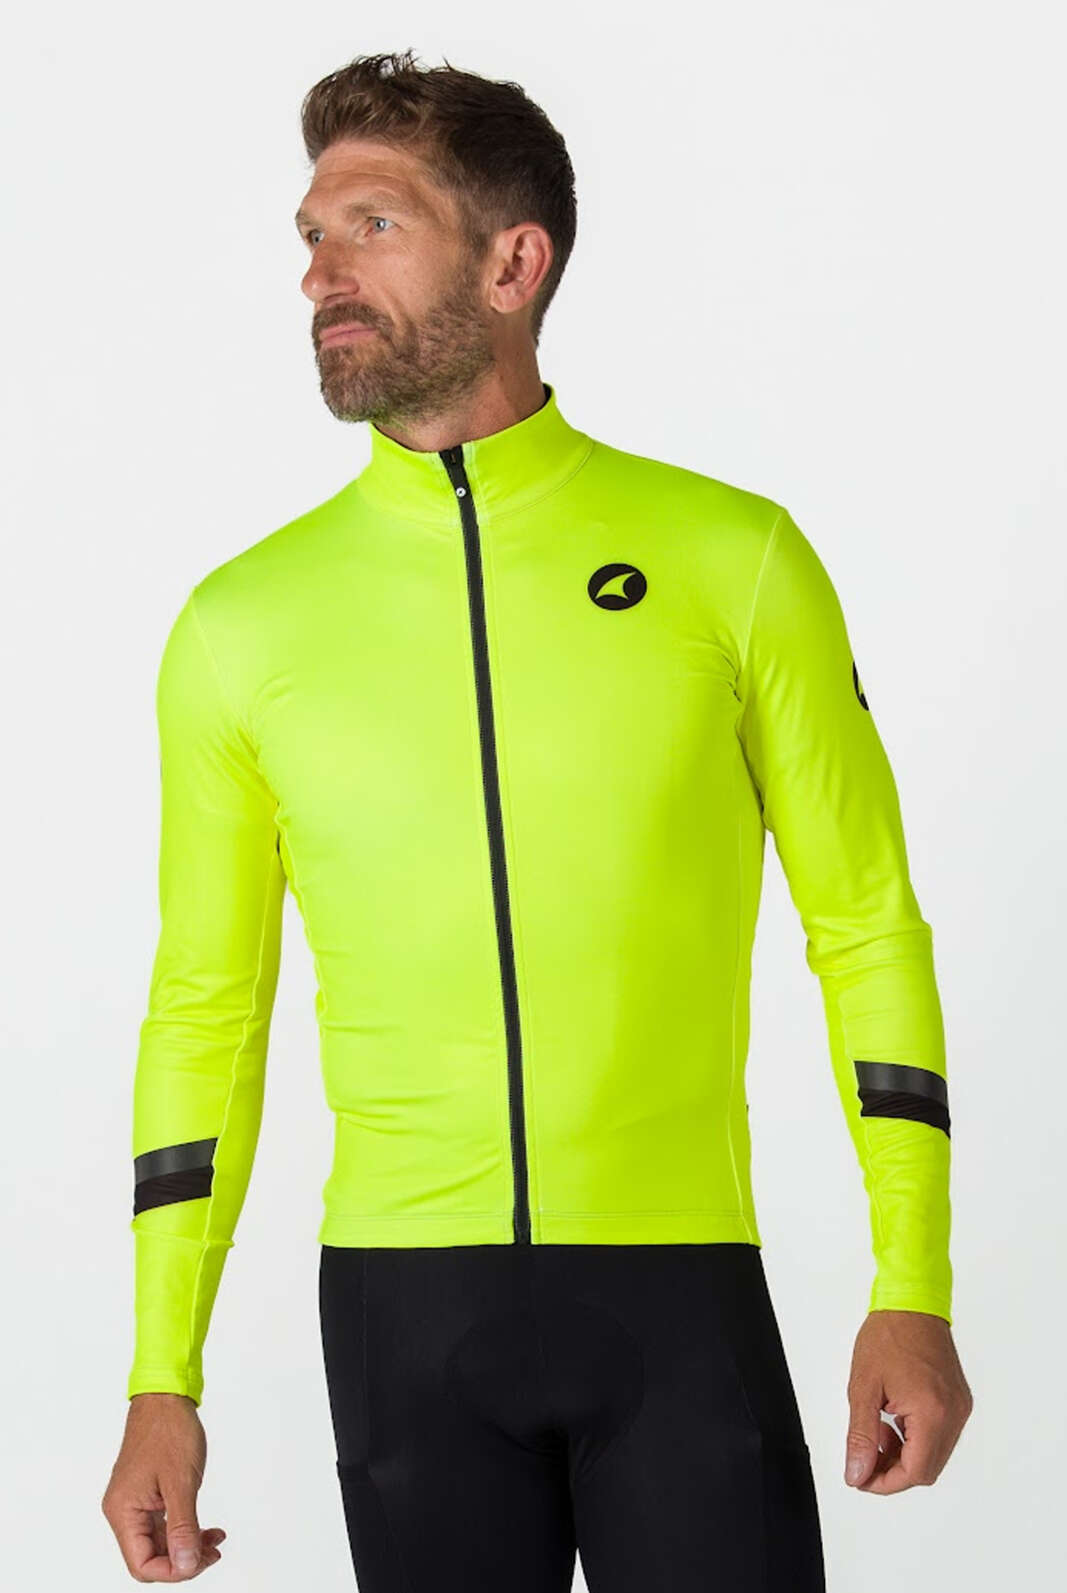 Men's High-Viz Yellow Thermal Cycling Jersey - Front View